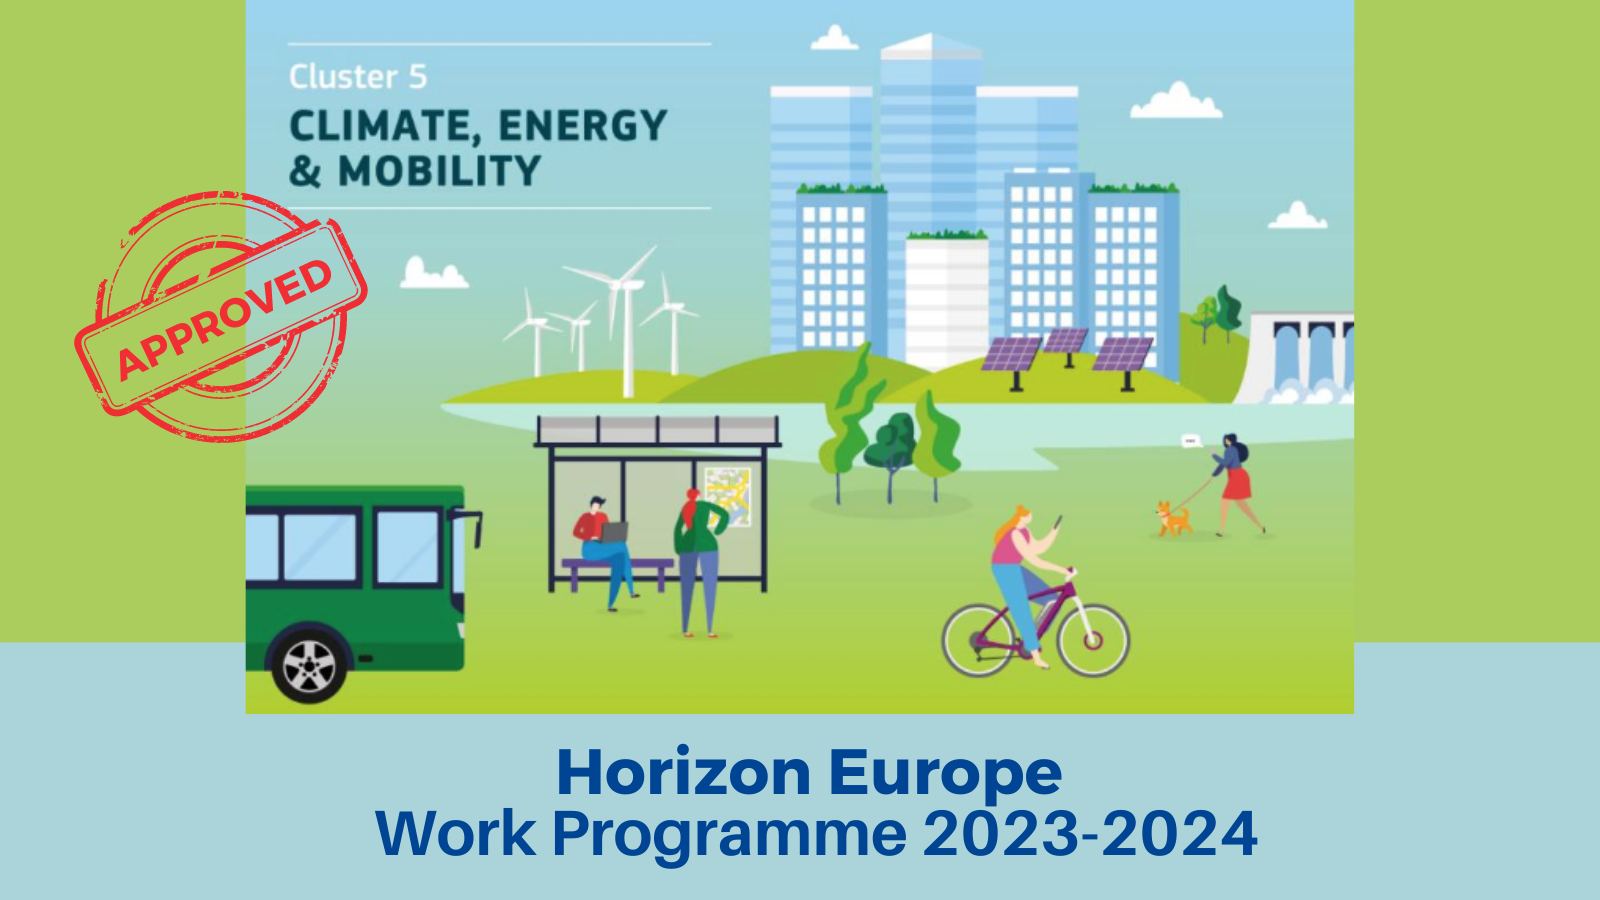 European Commission approved the final version of the Horizon Work Programme 2023 - 2024